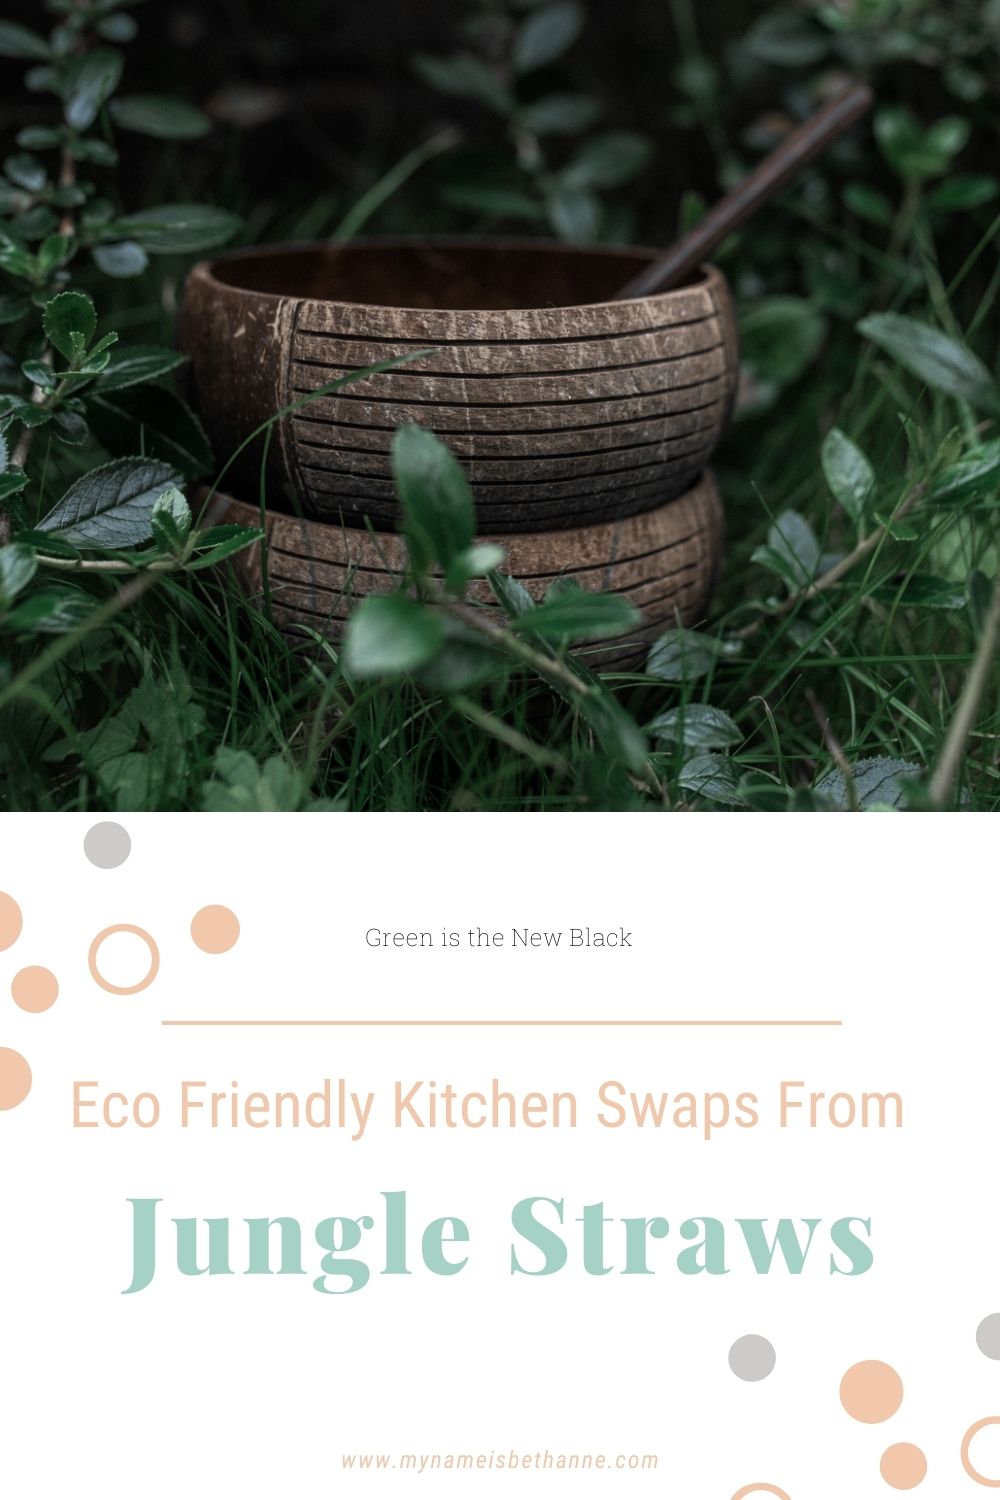 Jungle Straws - Earth Friendly Products